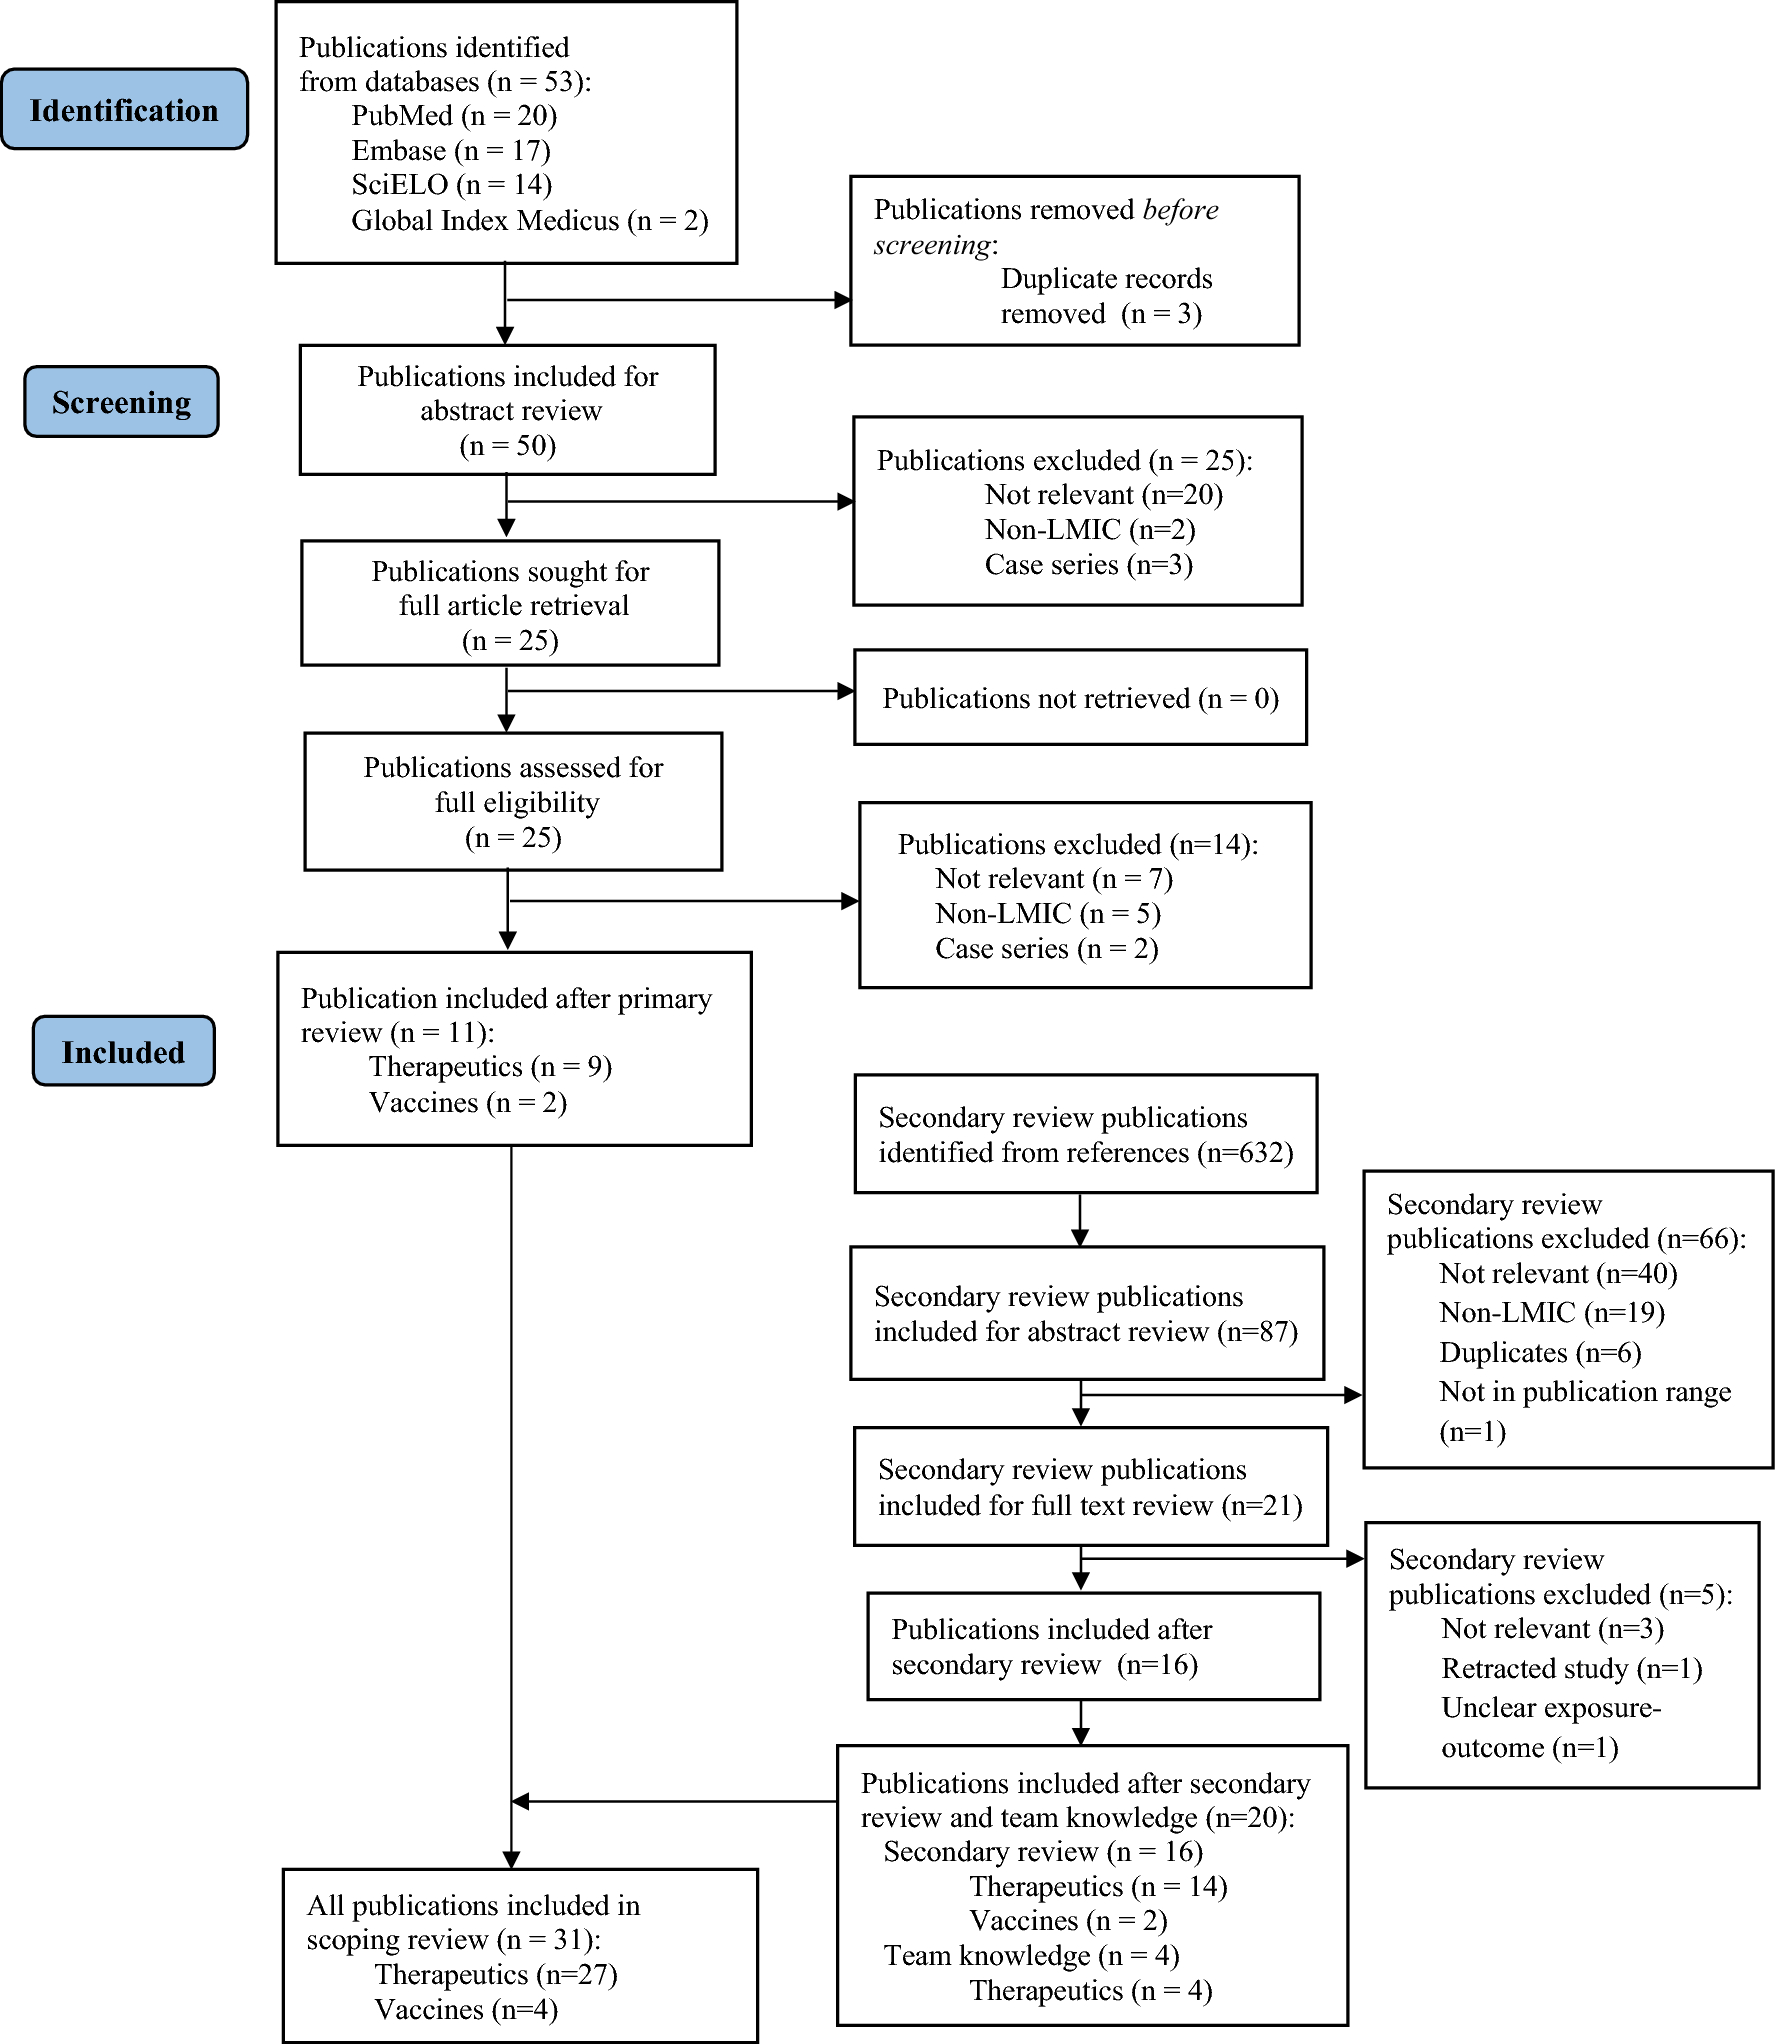 Pharmacovigilance in Pregnancy Studies, Exposures and Outcomes Ascertainment, and Findings from Low- and Middle-Income Countries: A Scoping Review